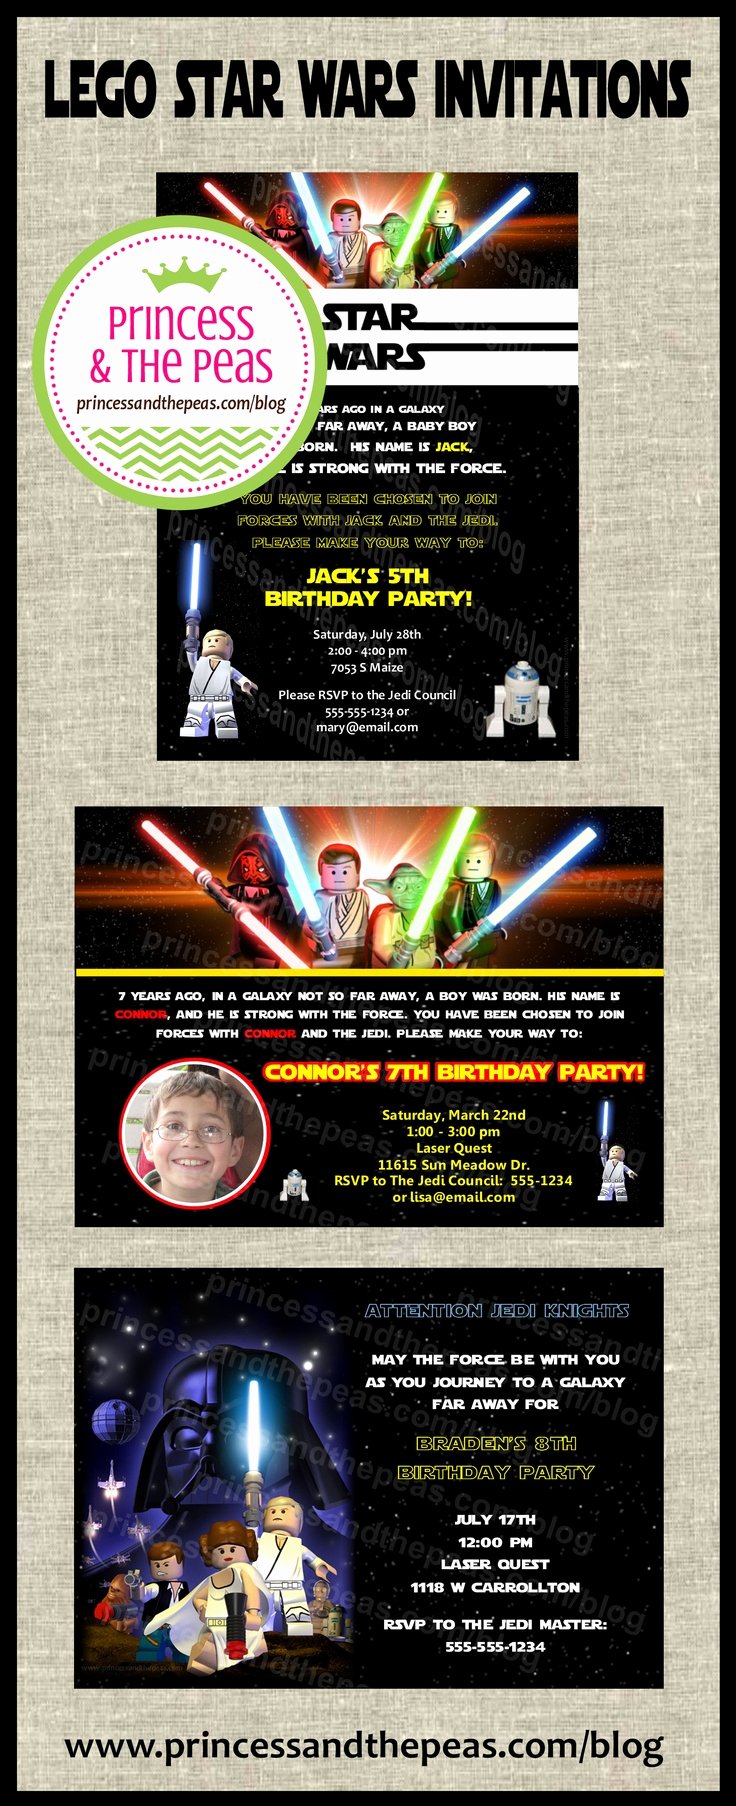 Lego Star Wars Invitations Inspirational 22 Best Images About Lego Star Wars Party Ideas On Pinterest